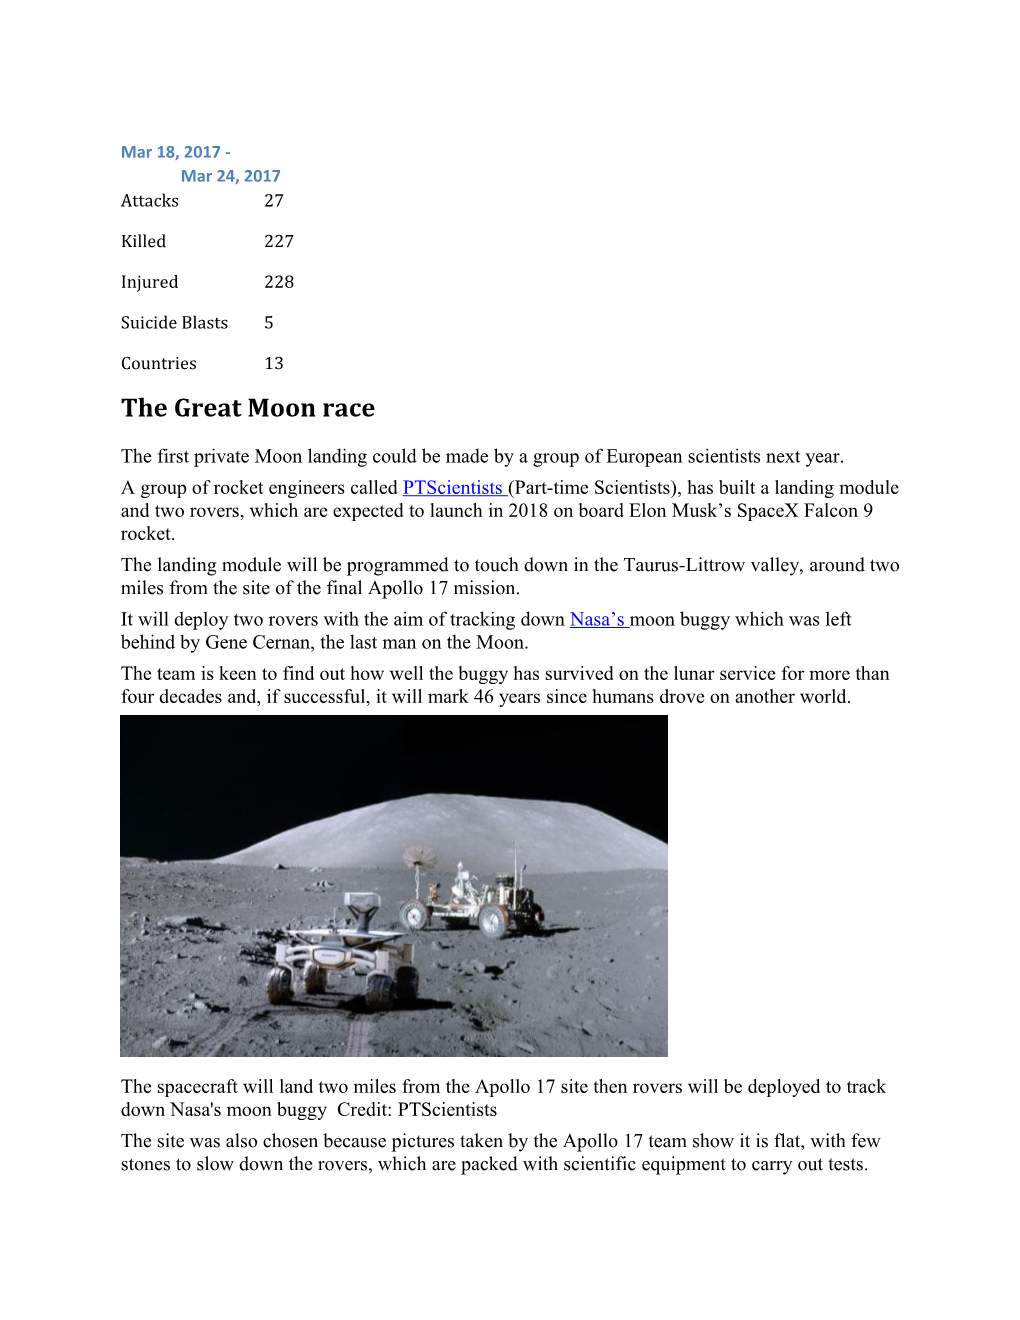 The Great Moon Race